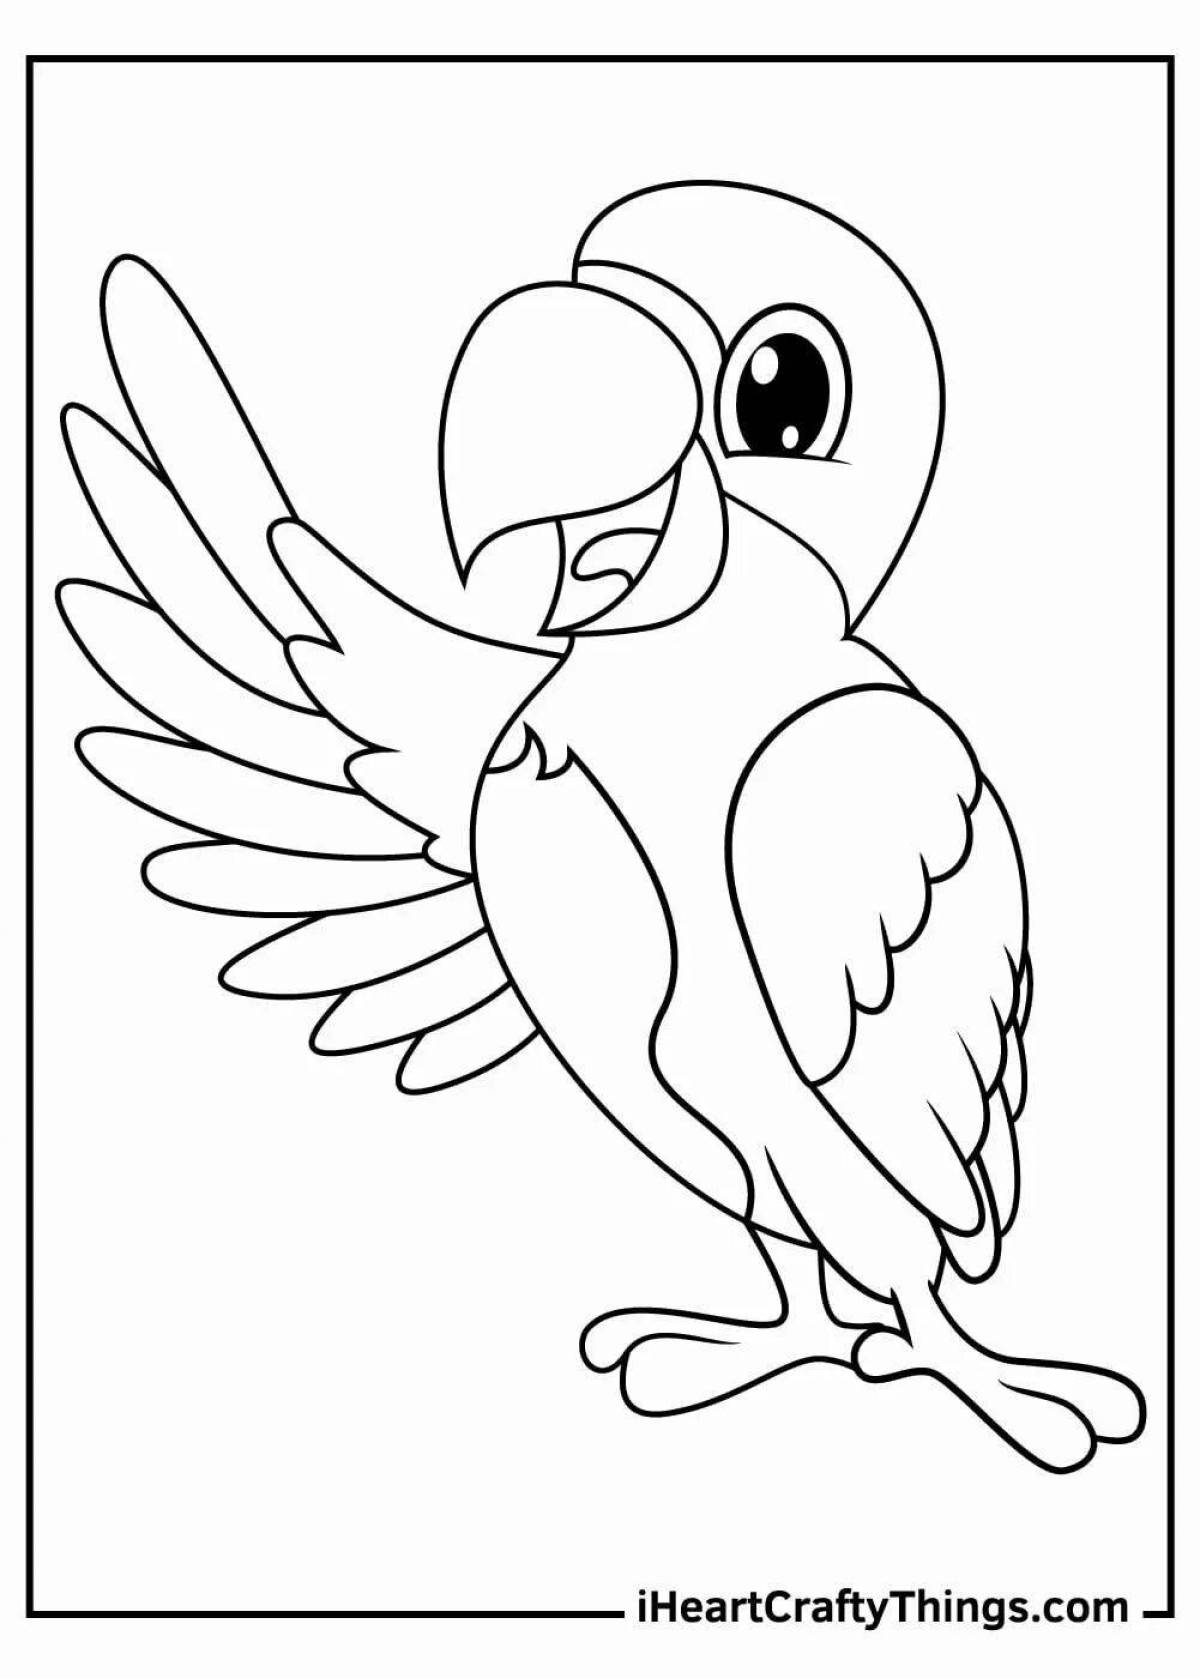 Gorgeous parrot coloring book for kids 6-7 years old